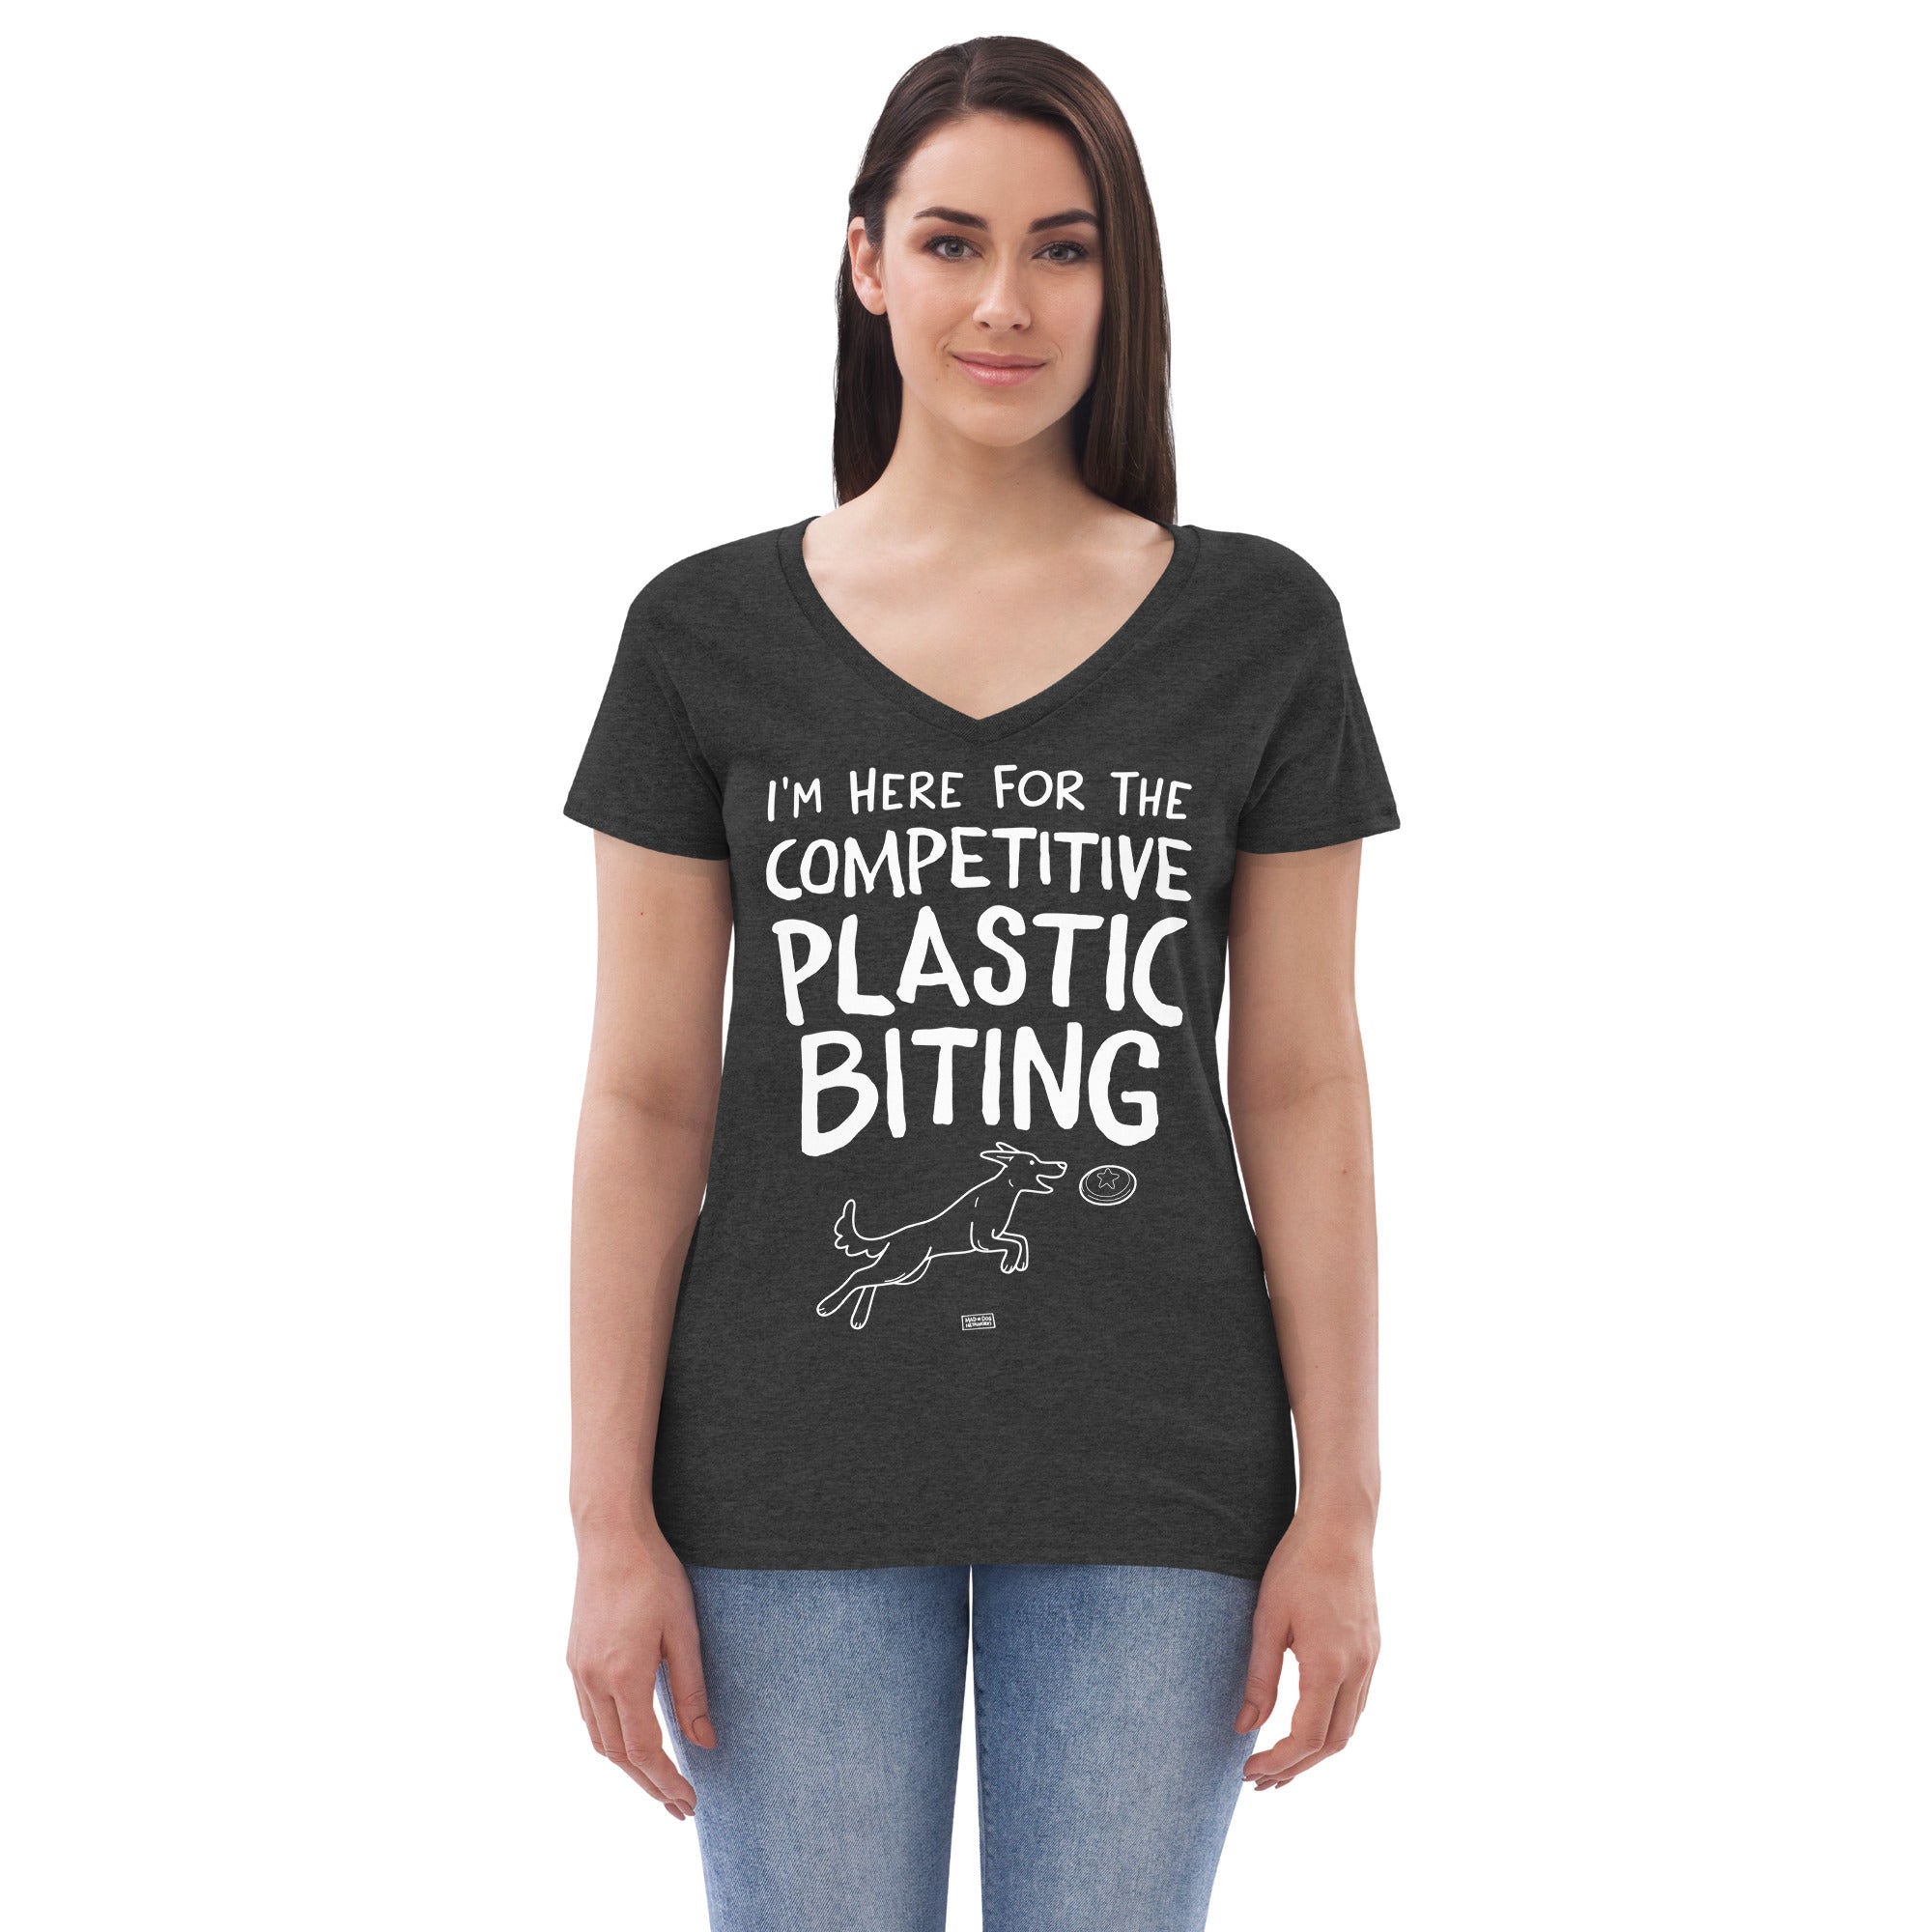 women's recycled v-neck: competitive plastic biting